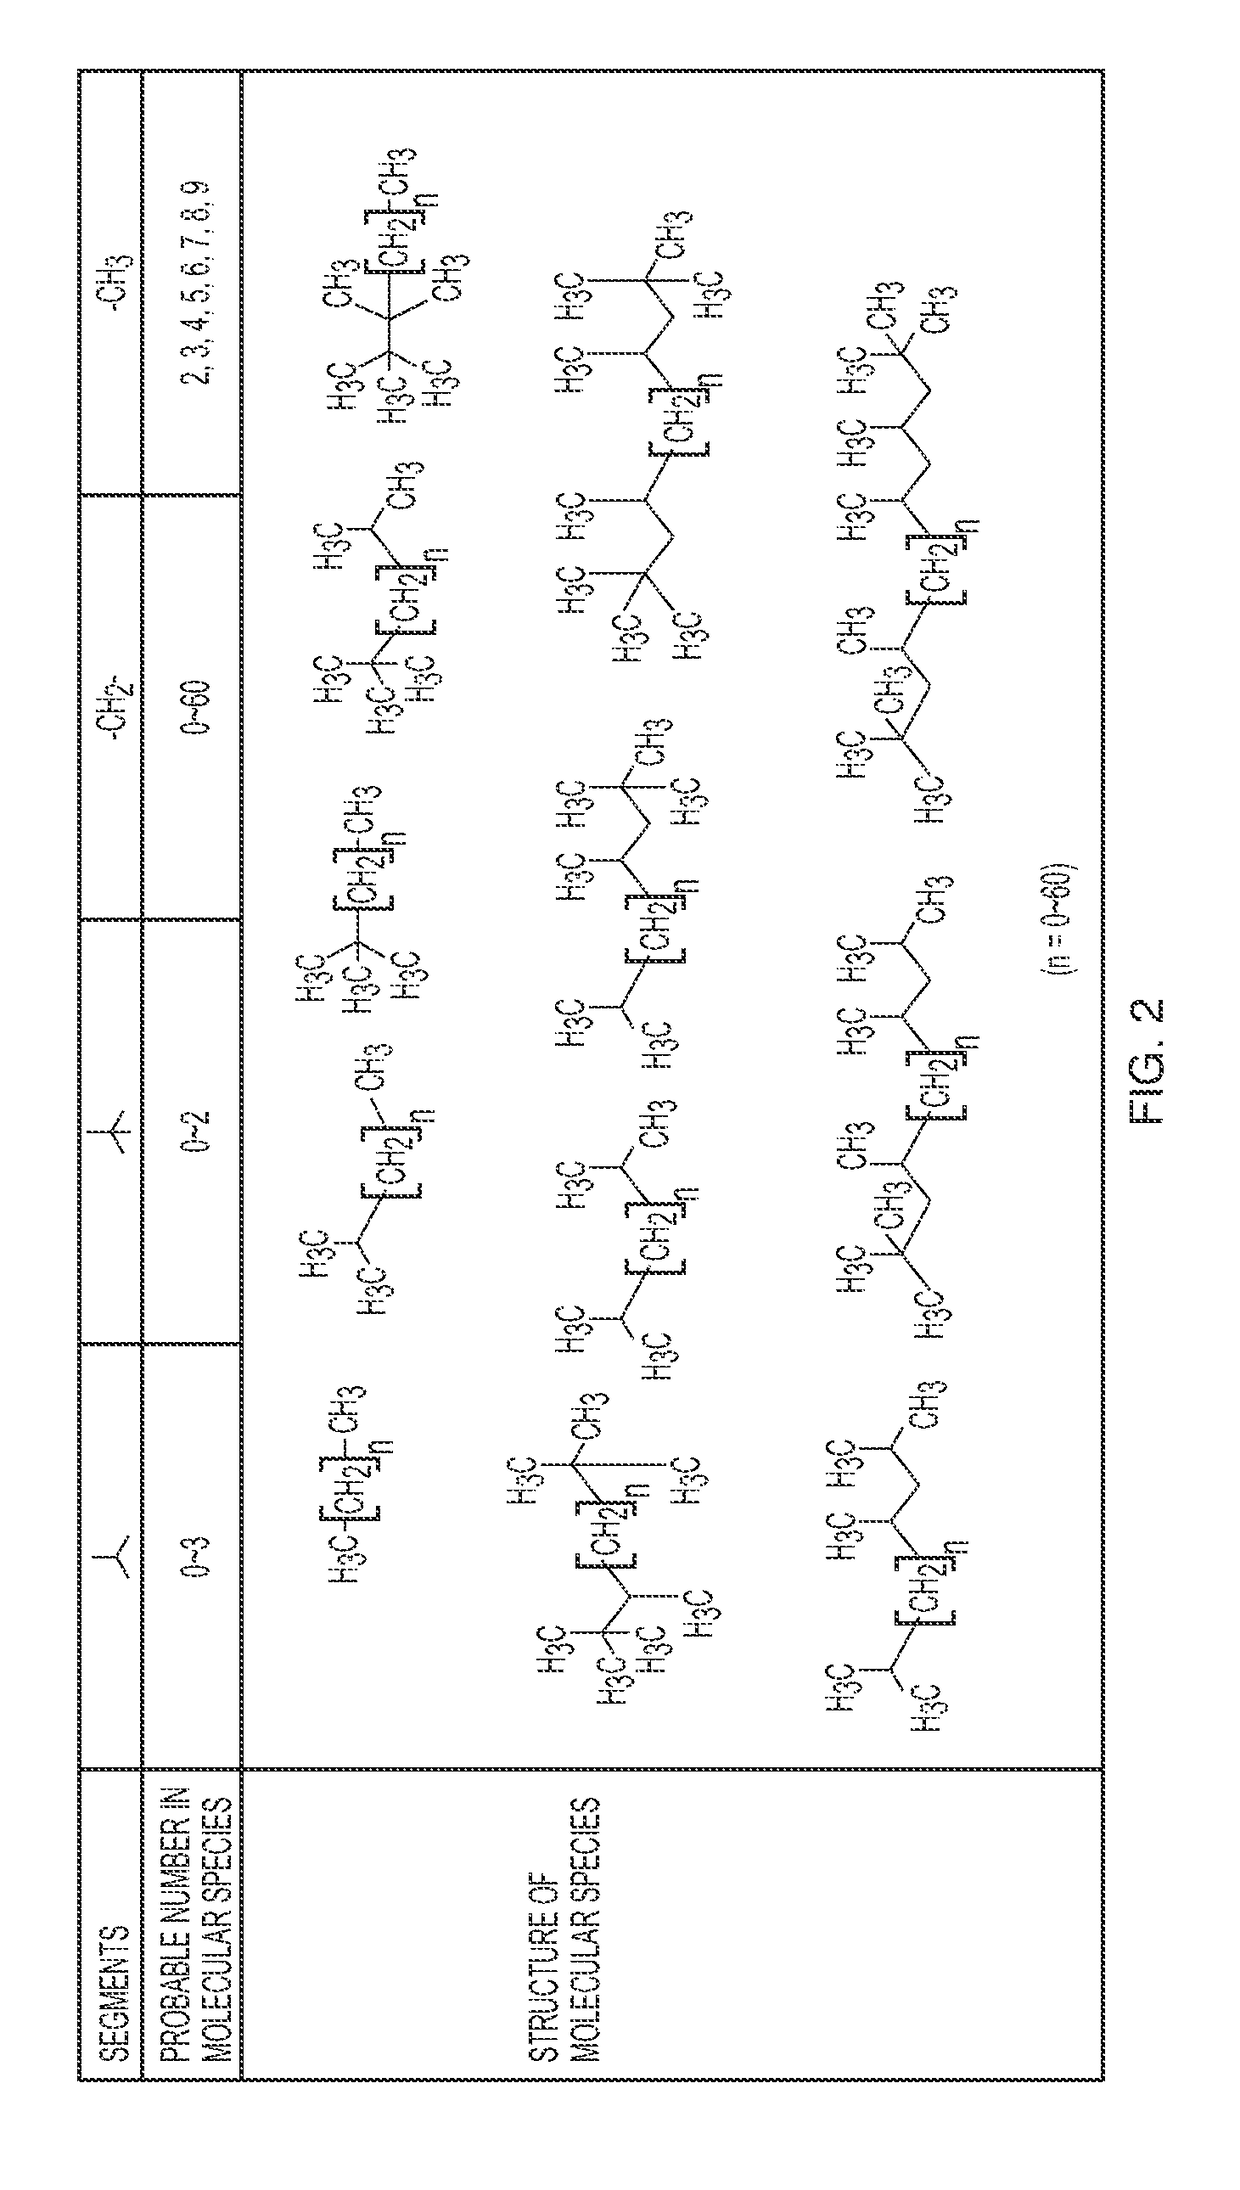 Method of characterizing chemical composition of crude oil for petroleum processing